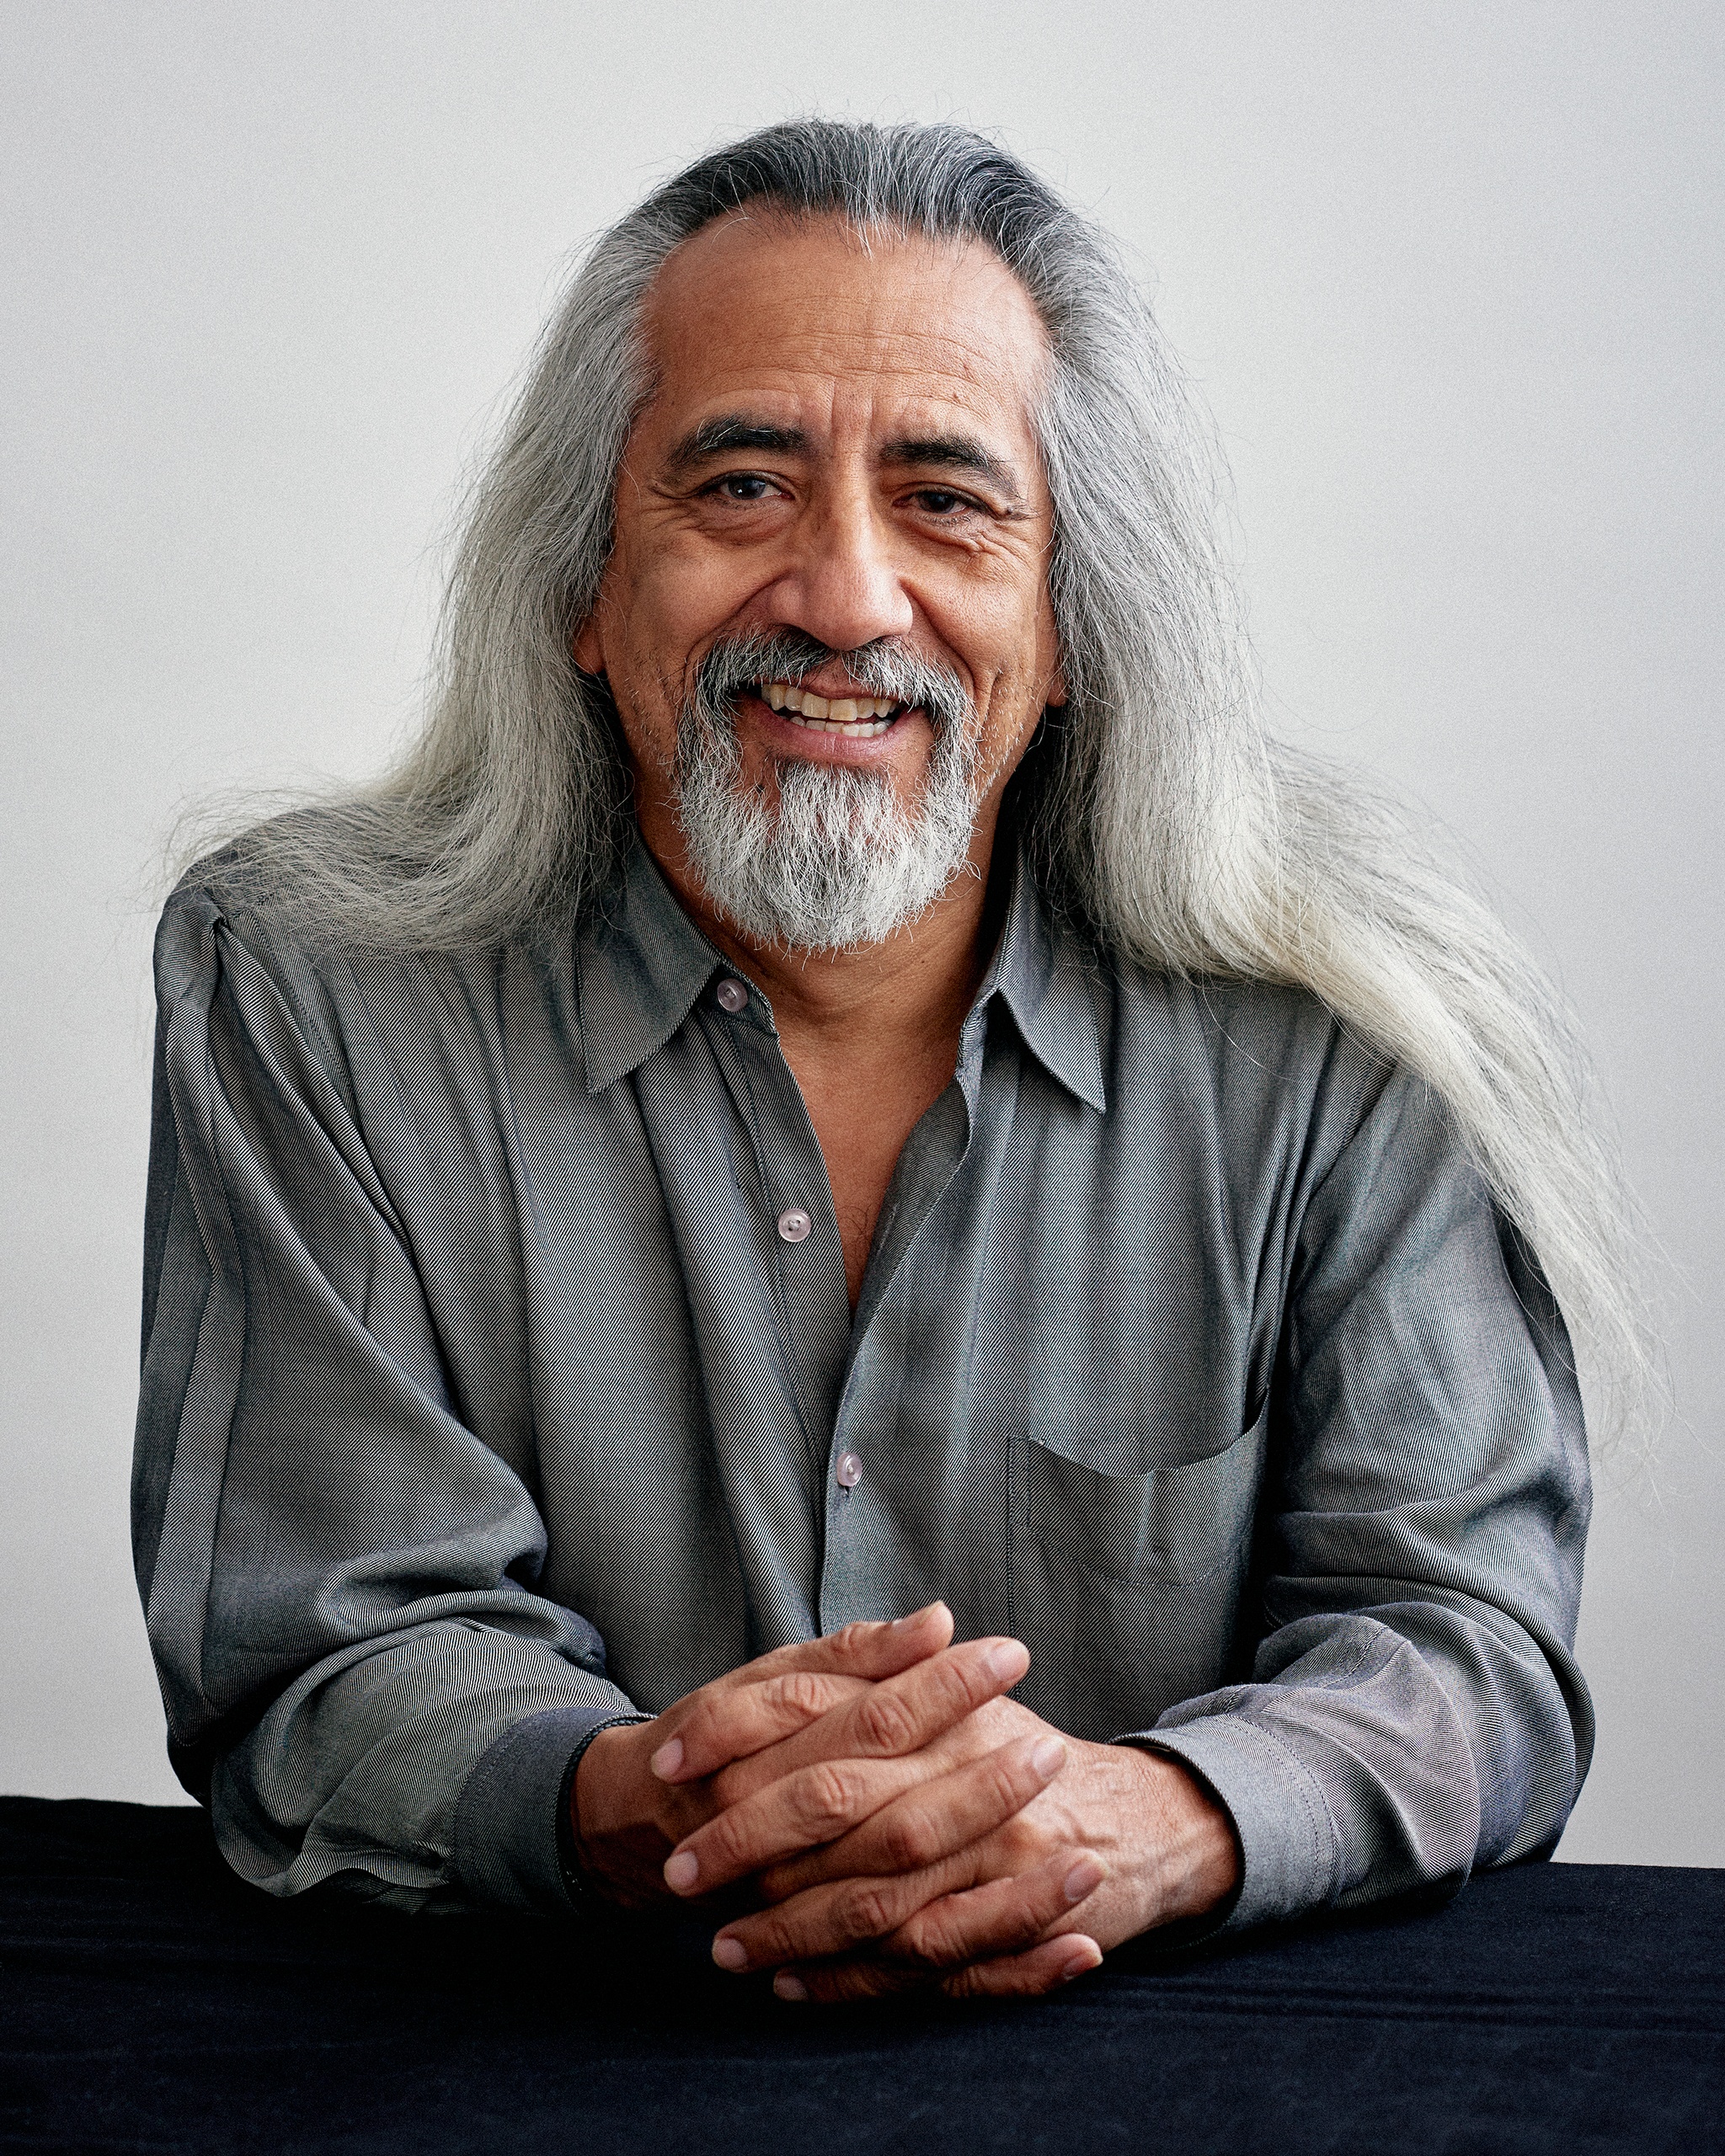 A photo of george emilio sanchez posing with elbows on a table and hands crossed in front of him. Sanchez wears a gray shirt and has long gray hair falling over his shoulders and a gray beard.